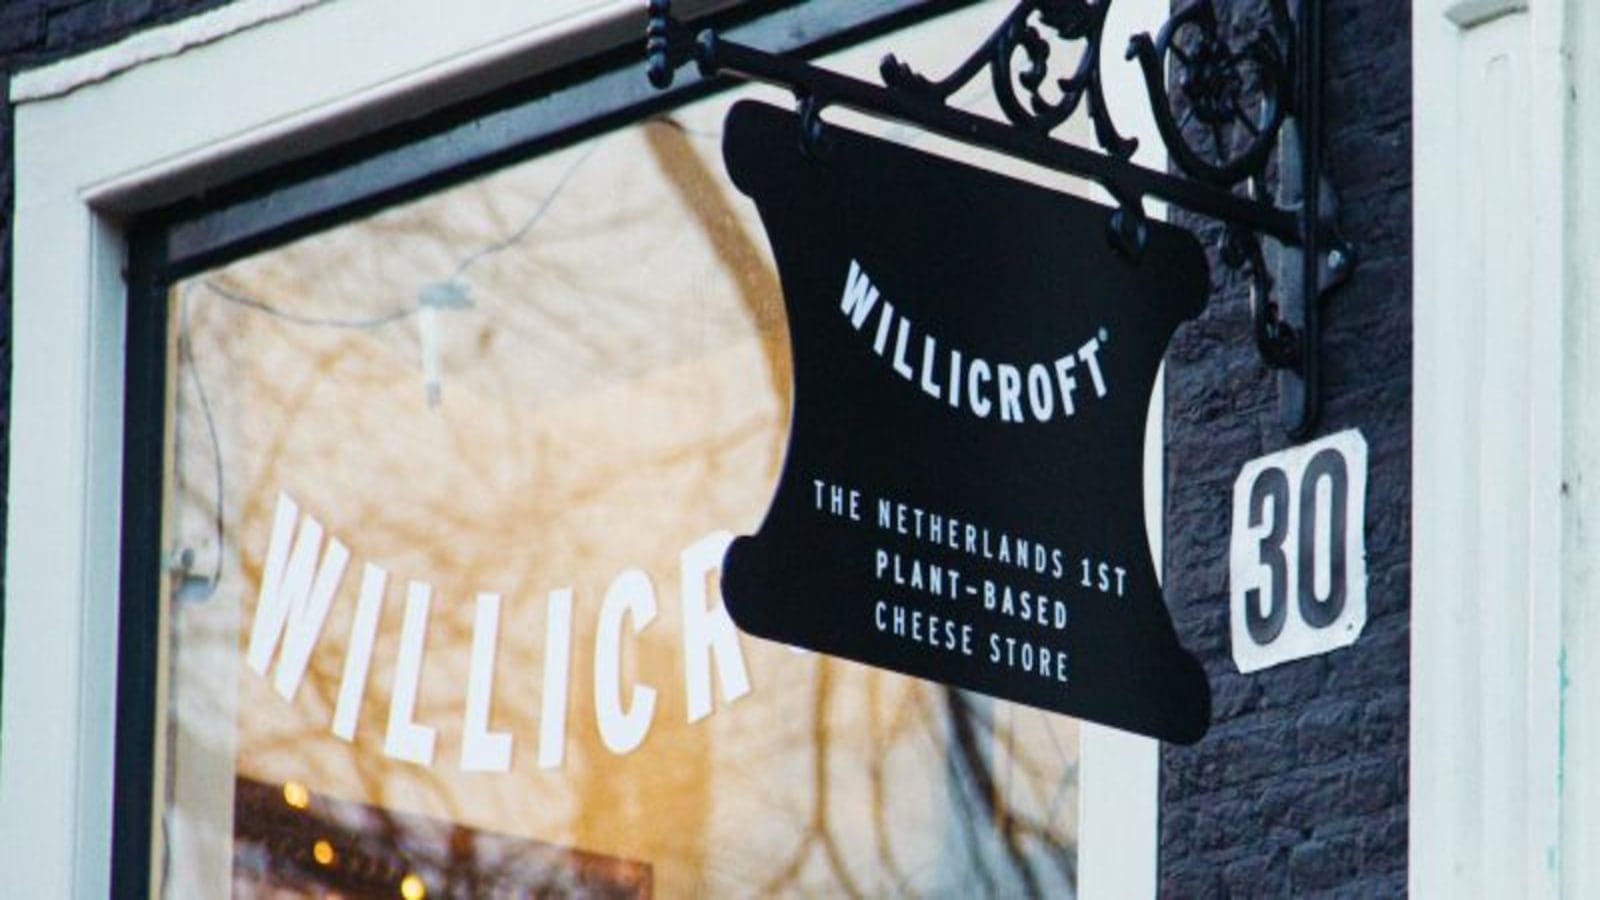 Willicroft receives US$2.11m in seed investment round to propel growth in new markets